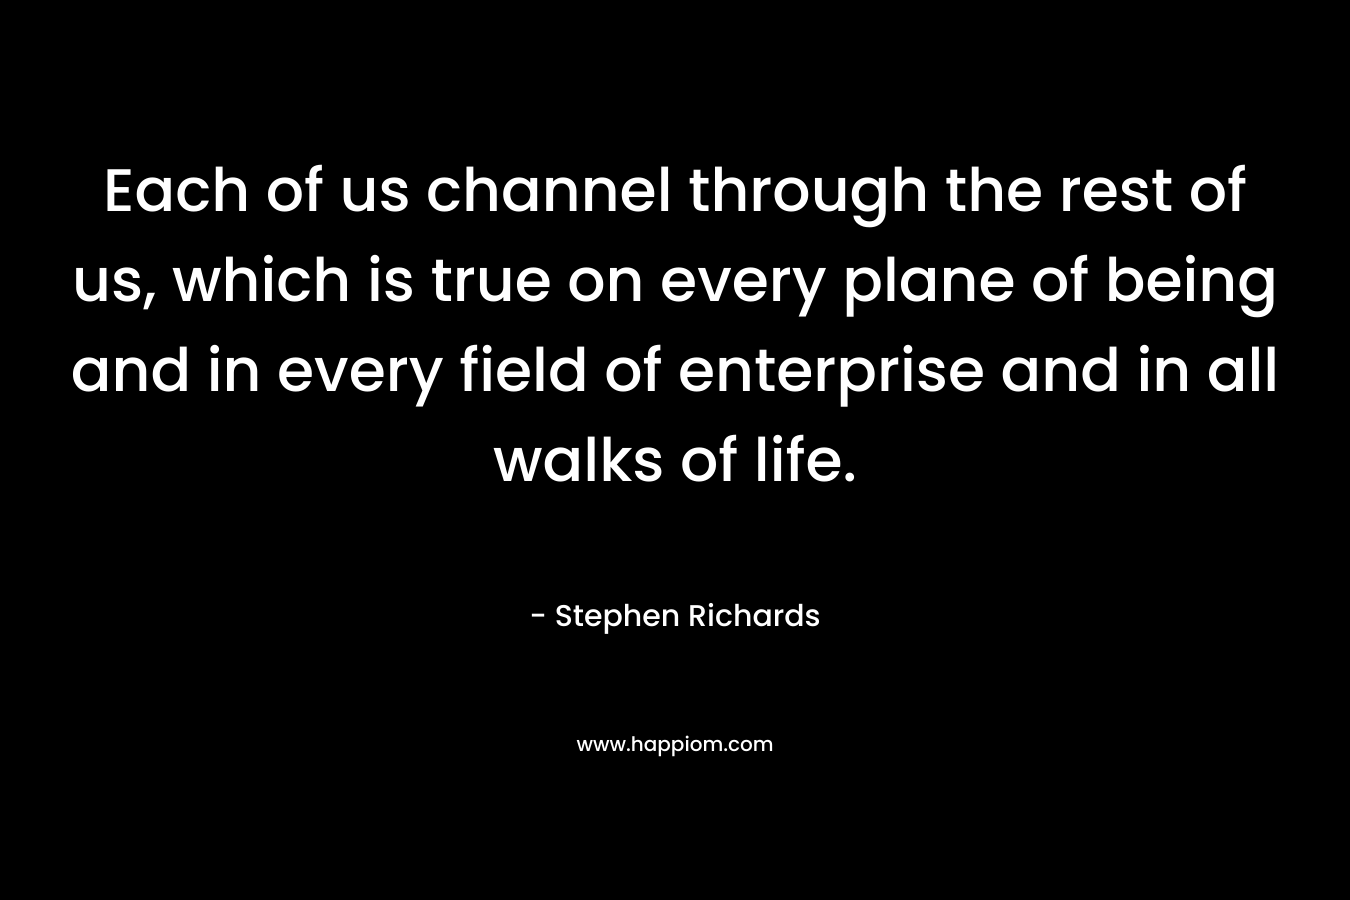 Each of us channel through the rest of us, which is true on every plane of being and in every field of enterprise and in all walks of life.